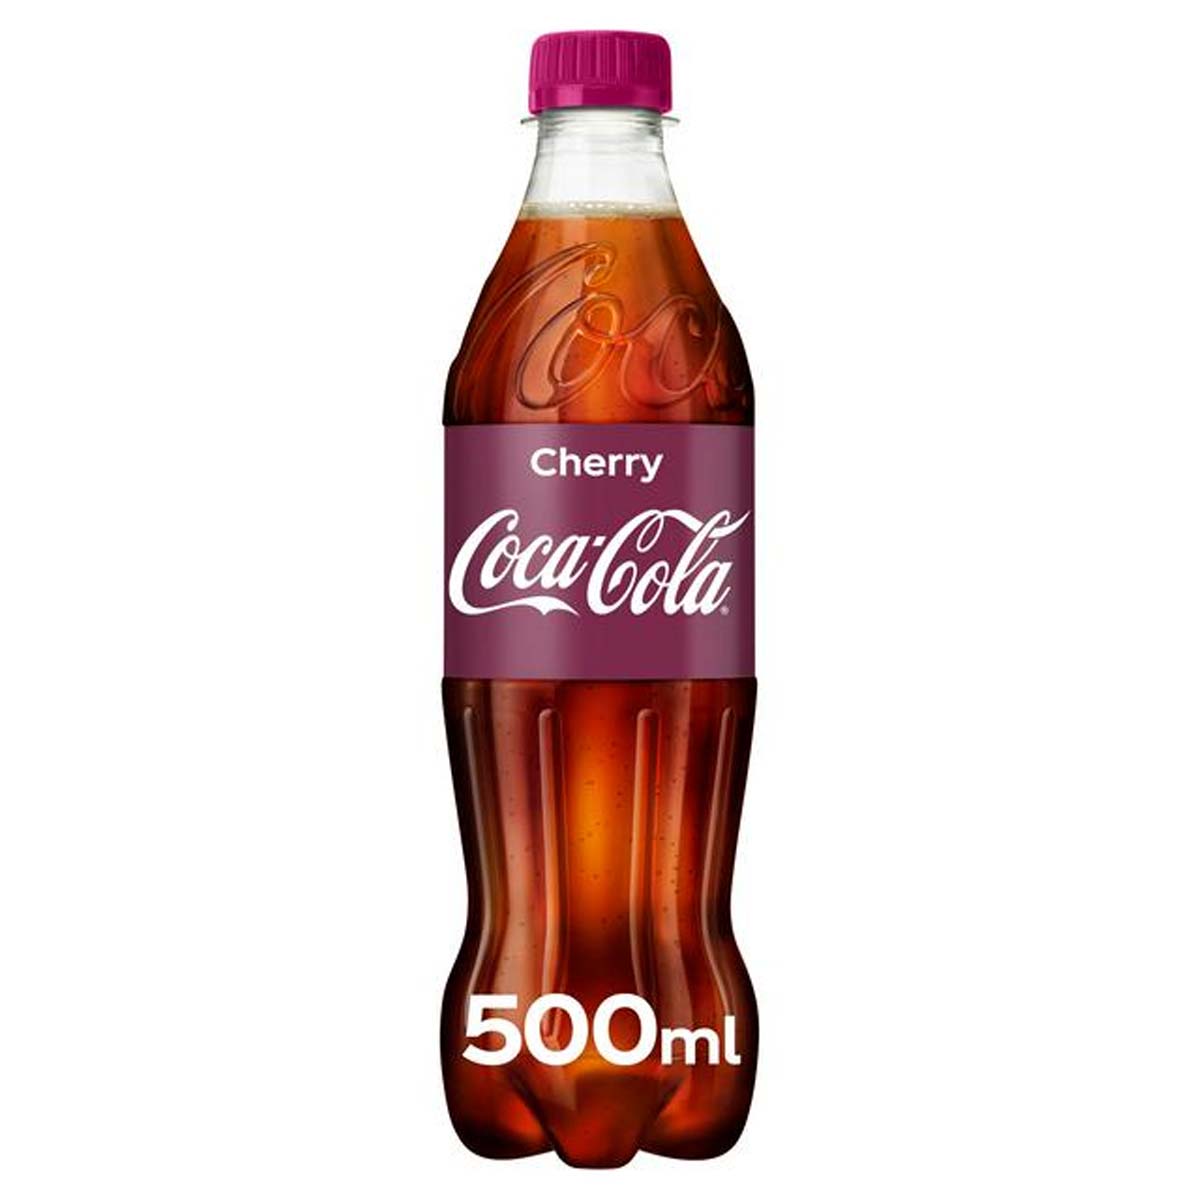 Coca-Cola - Cherry Bottle - 500ml - Continental Food Store